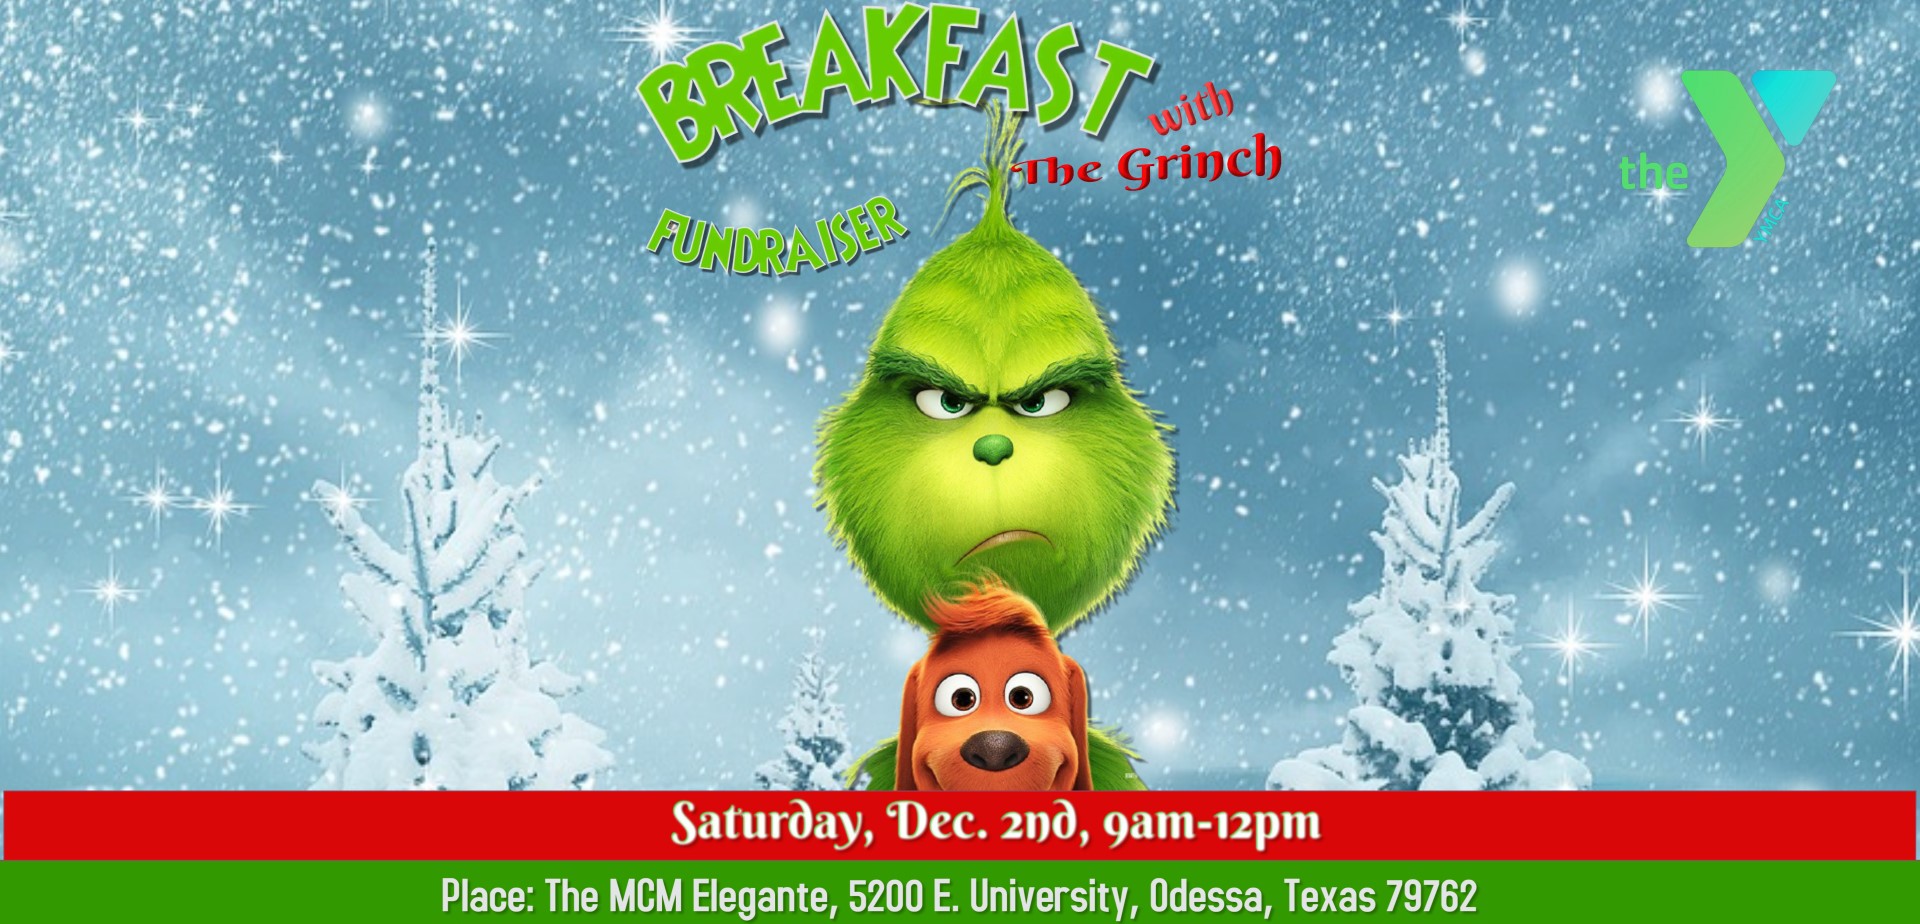 Breakfast with the Grinch